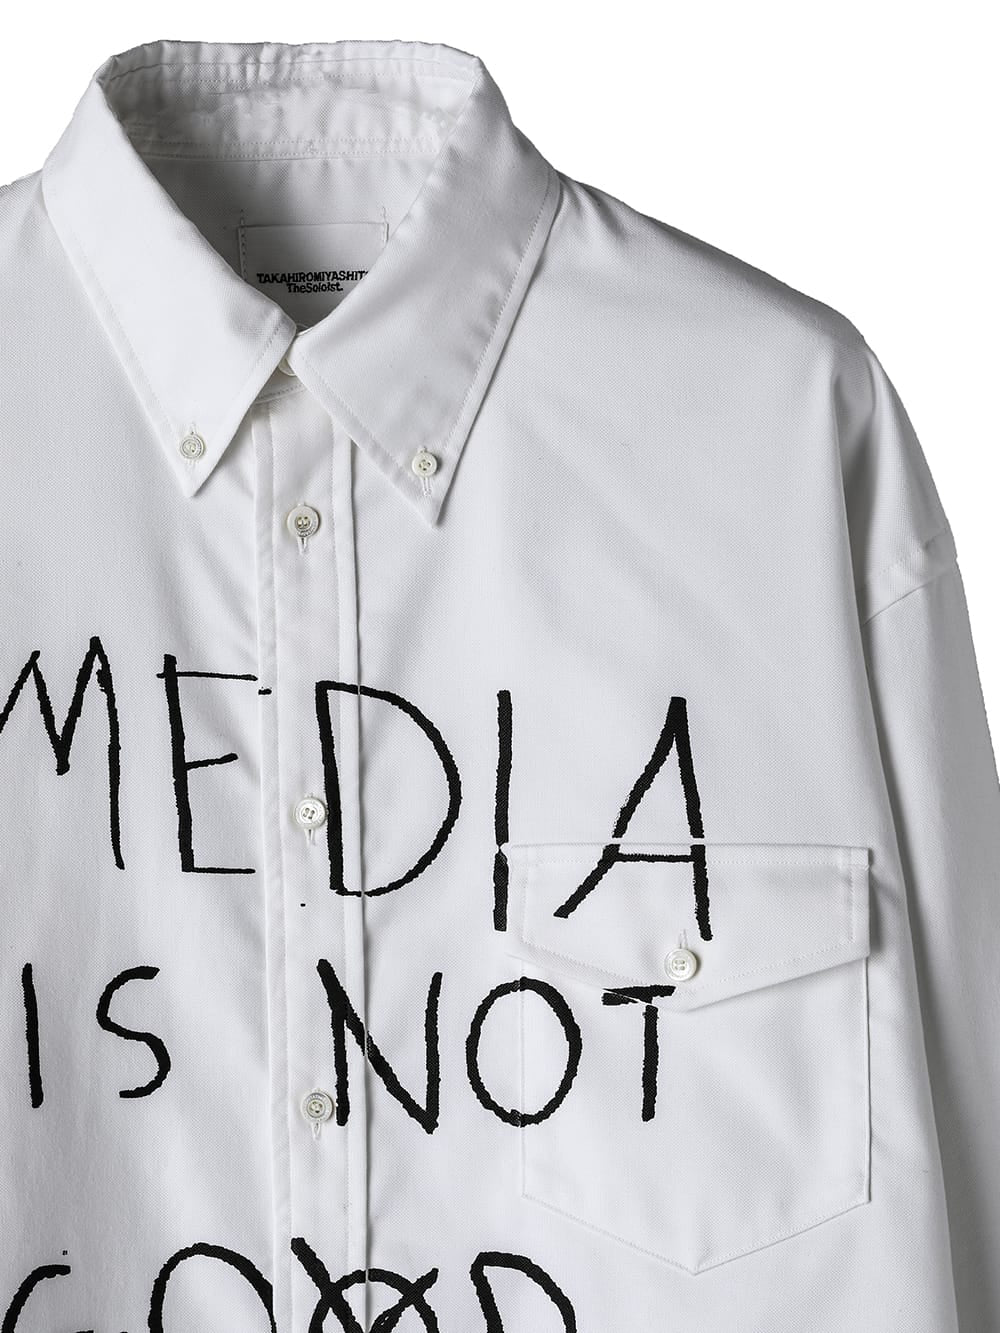 button down shirt. (media is not go⨂d.type 2)